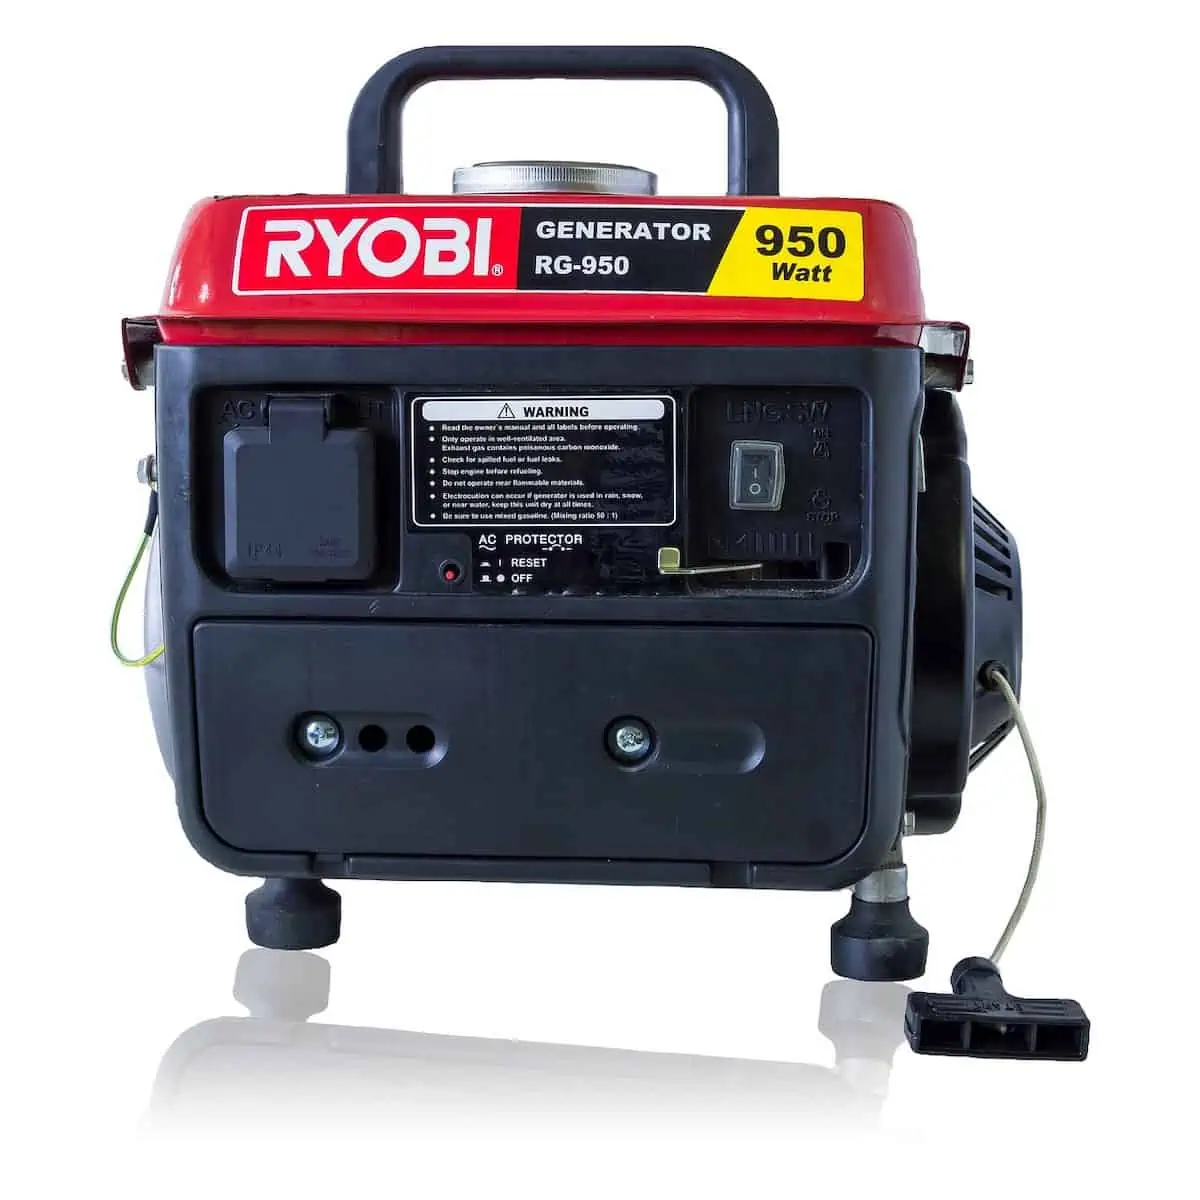 A Guide to Selecting the Right Generator!